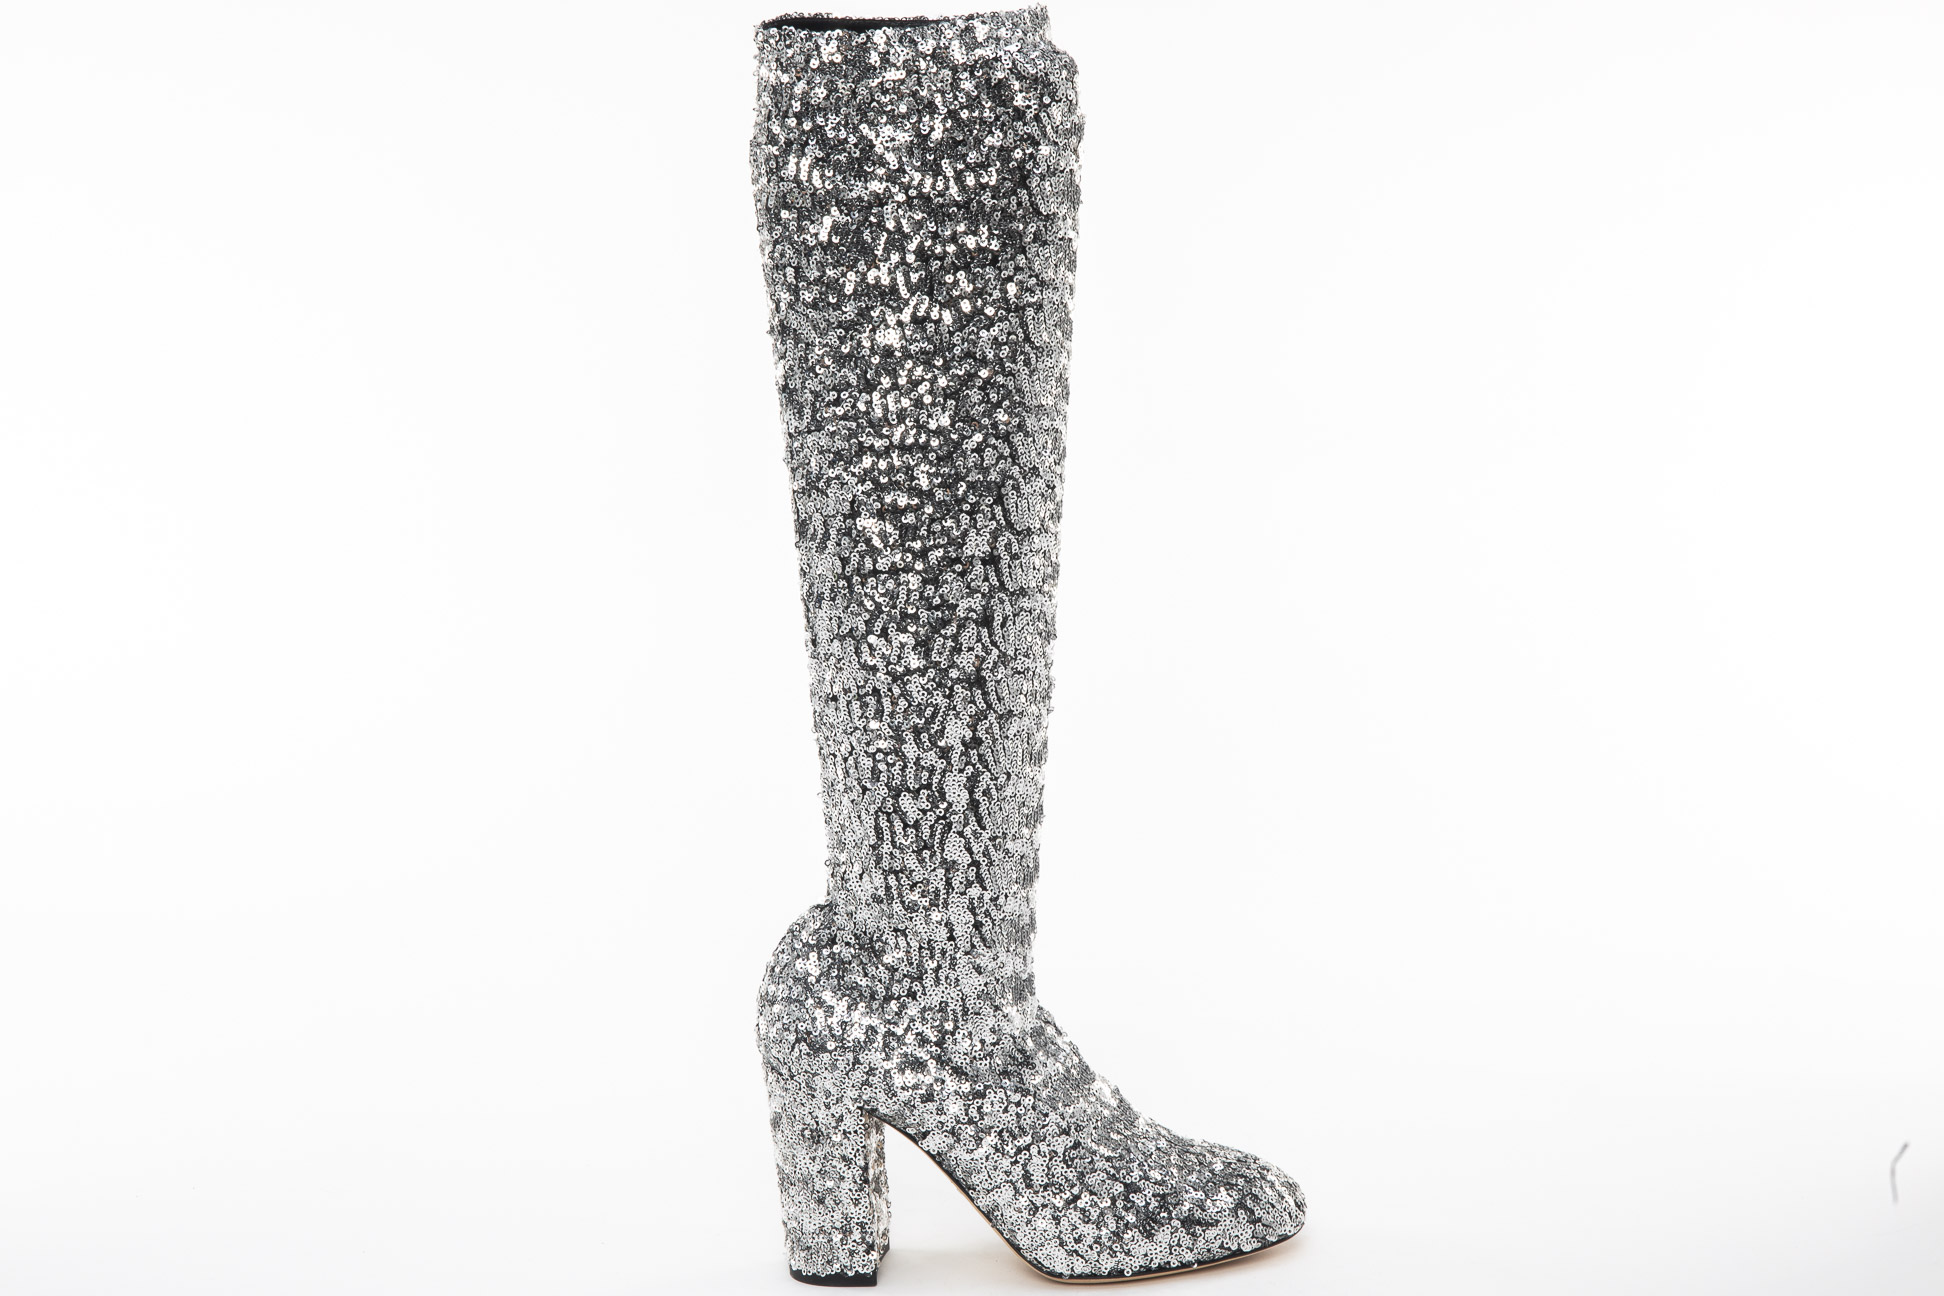 A PAIR OF DOLCE & GABBANA 'VALLY' SEQUIN BOOTS EU 37.5 - Image 2 of 4